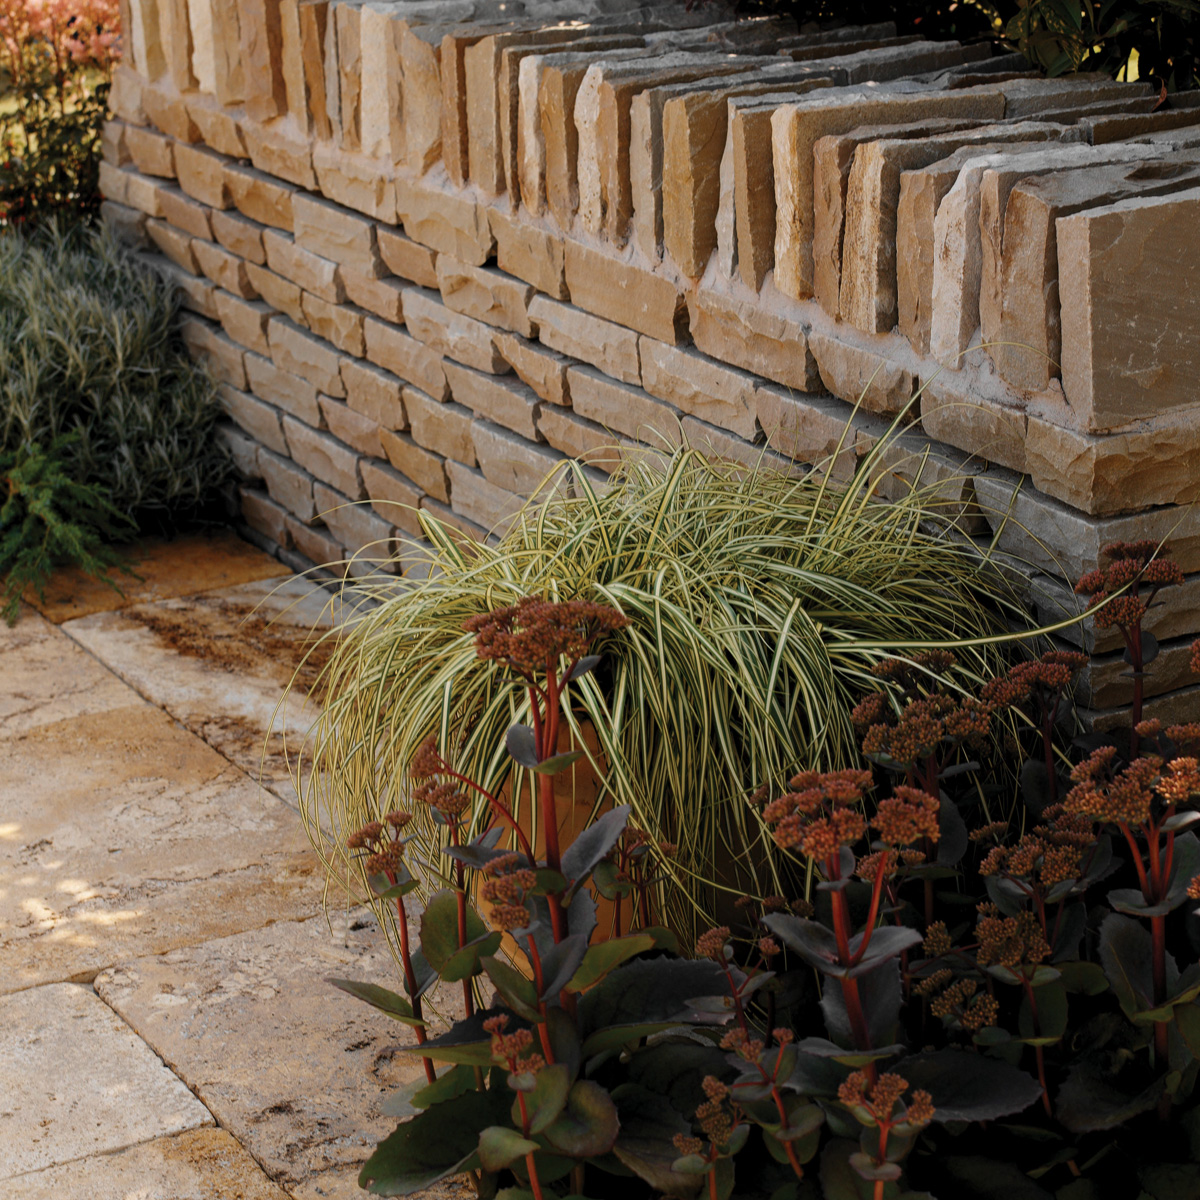 Fossil Indian Sandstone Walling